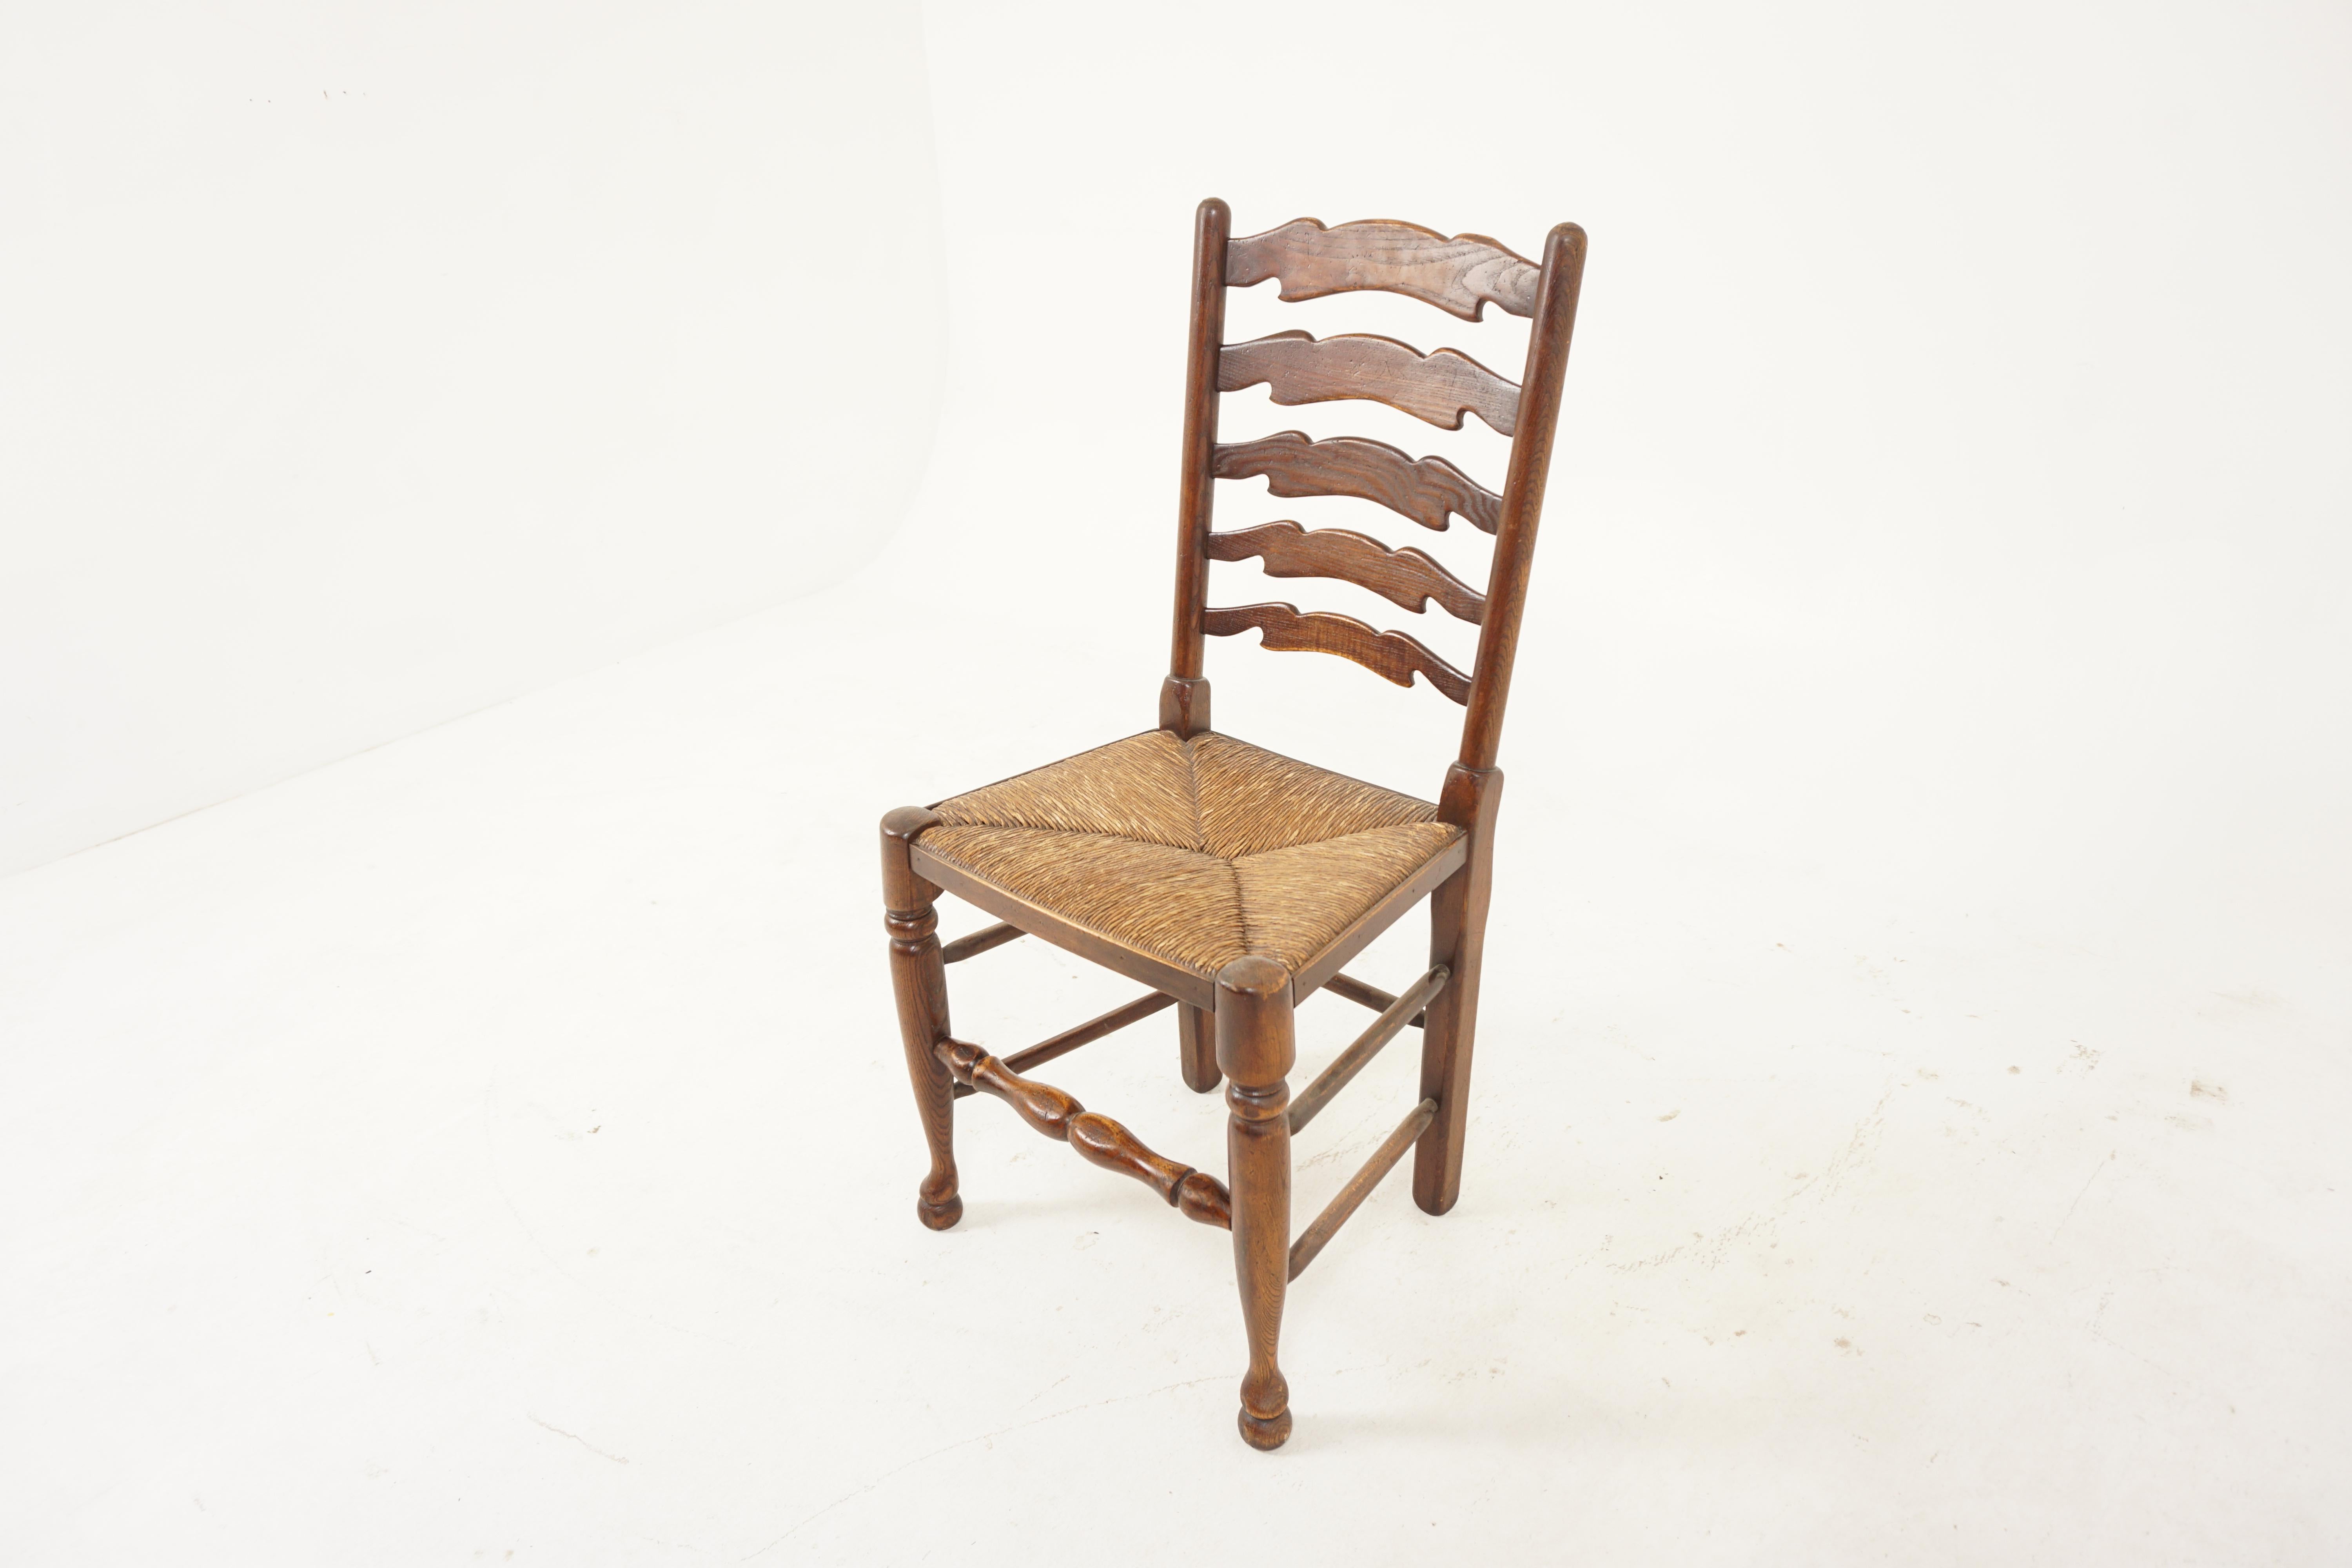 Antique oak ladder back rush seat dining chair, Scotland 1900, B2922

Scotland 1900
Solid oak
Original finish
Shaped top rail with side supports
Shaped splats to the back
Rush woven seat
Turned legs and double turned stretchers
Solid sturdy